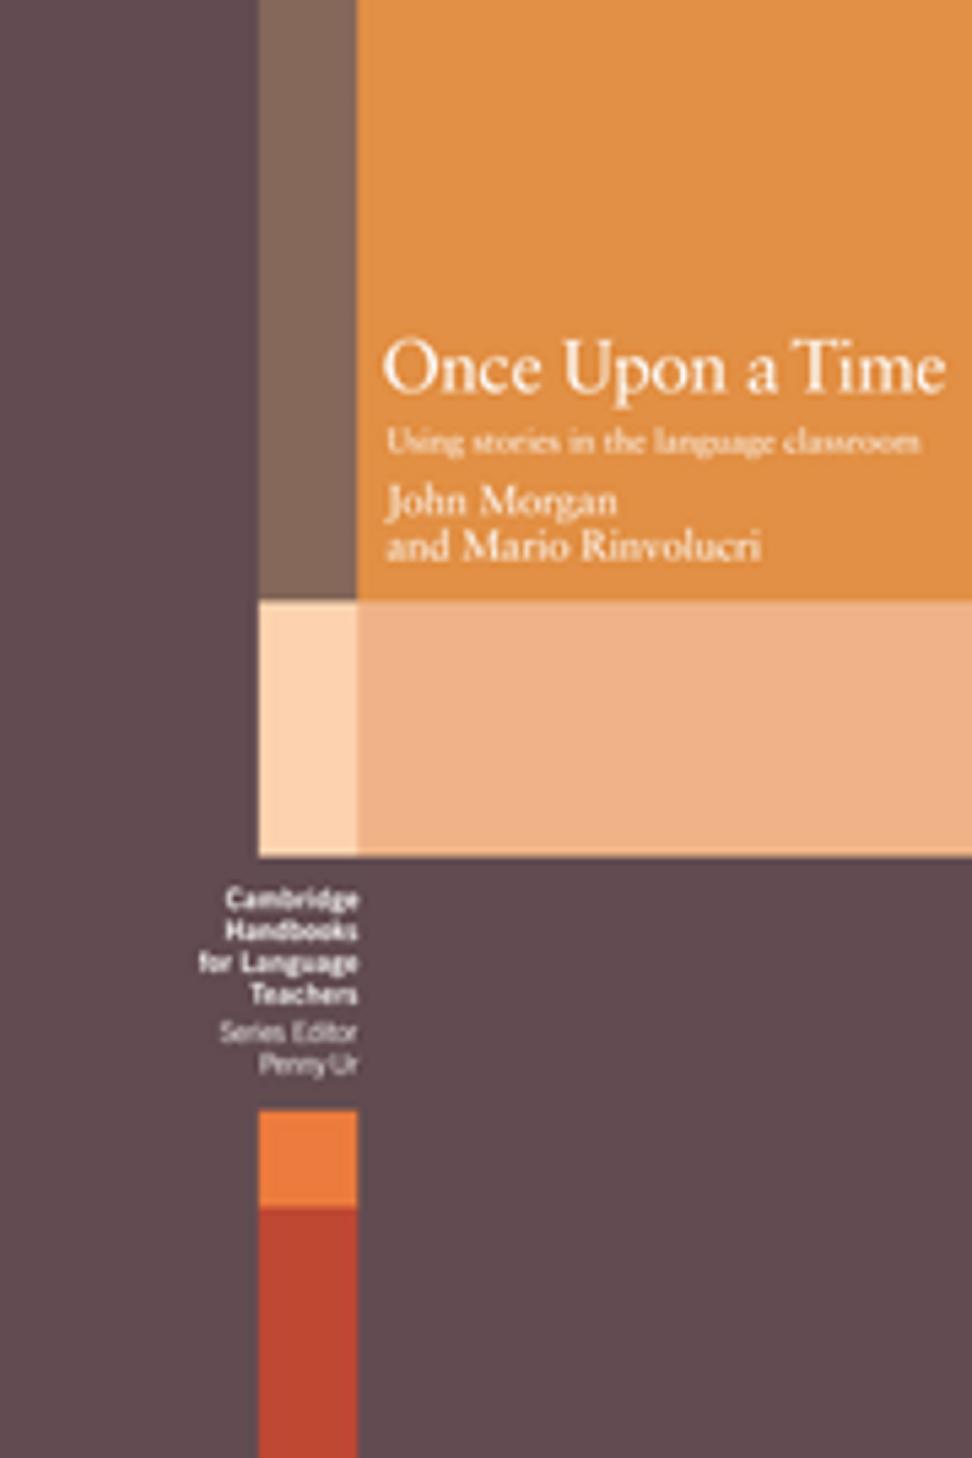 ONCE UPON A TIME Using stories - Handbooks Language Techers